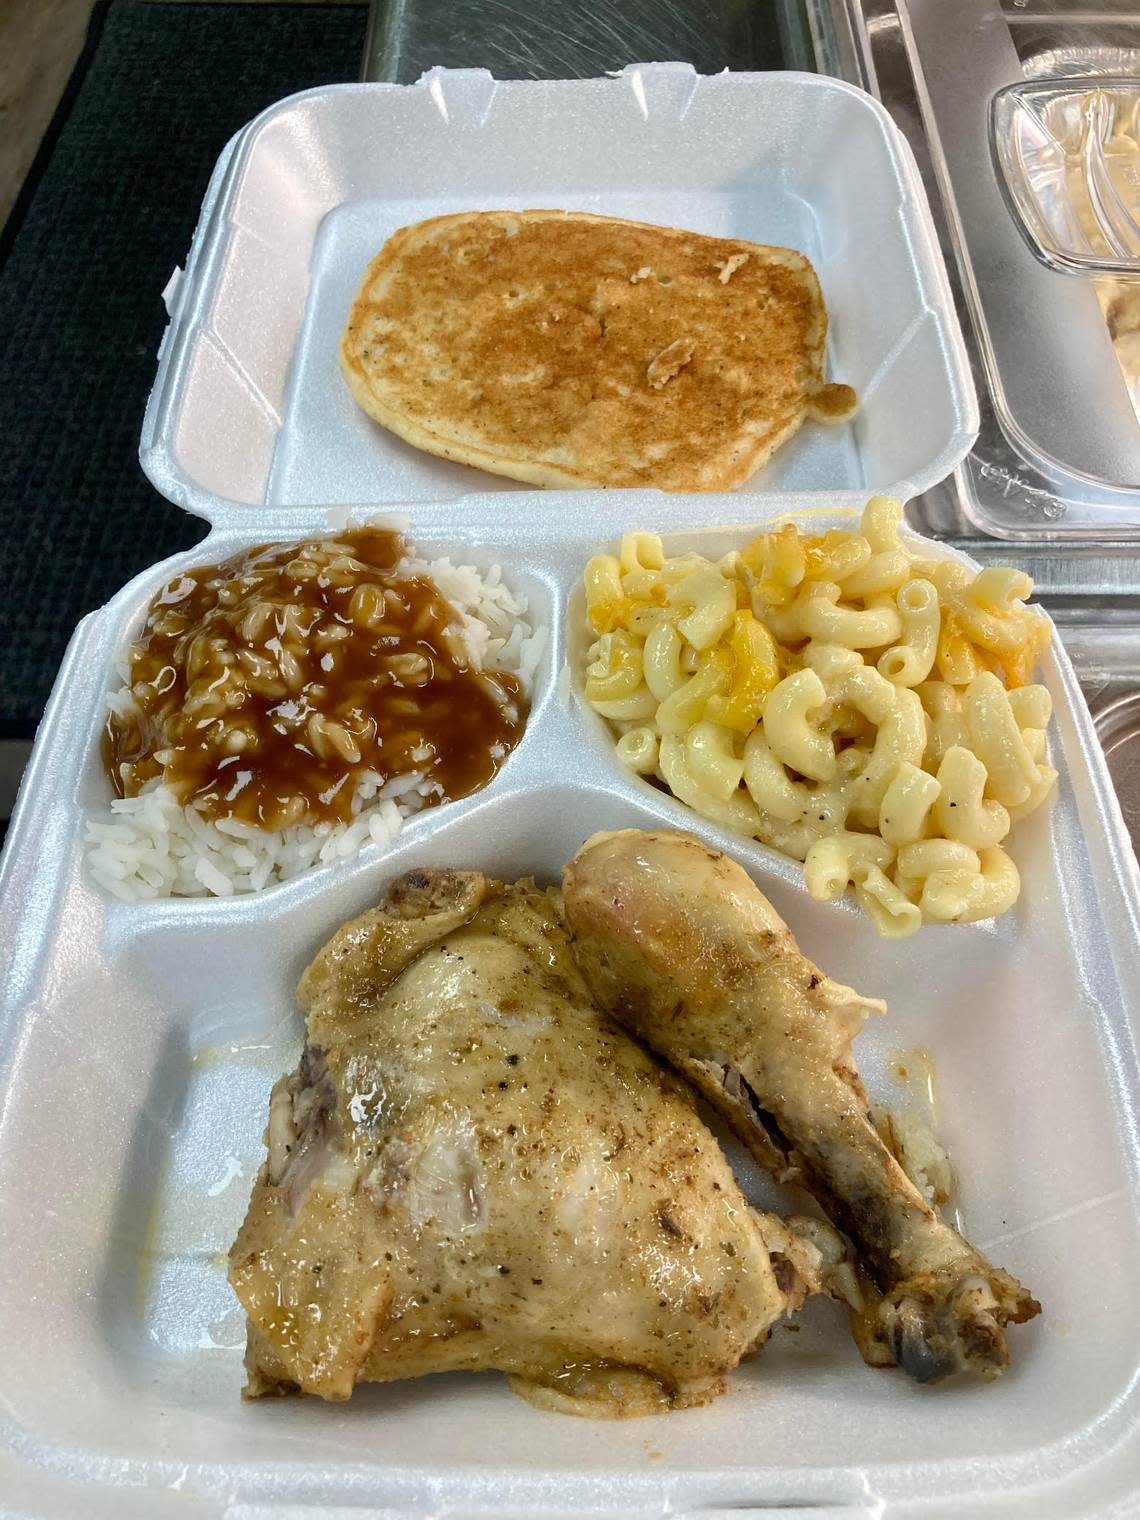 Baked chicken, mac and cheese, rice with gravy and hoe cake cornbread from Hunni BJ’s Foodbar & Grill, a new cafeteria-style Southern and Cajun food restaurant at 504 Russell Parkway in Warner Robins.